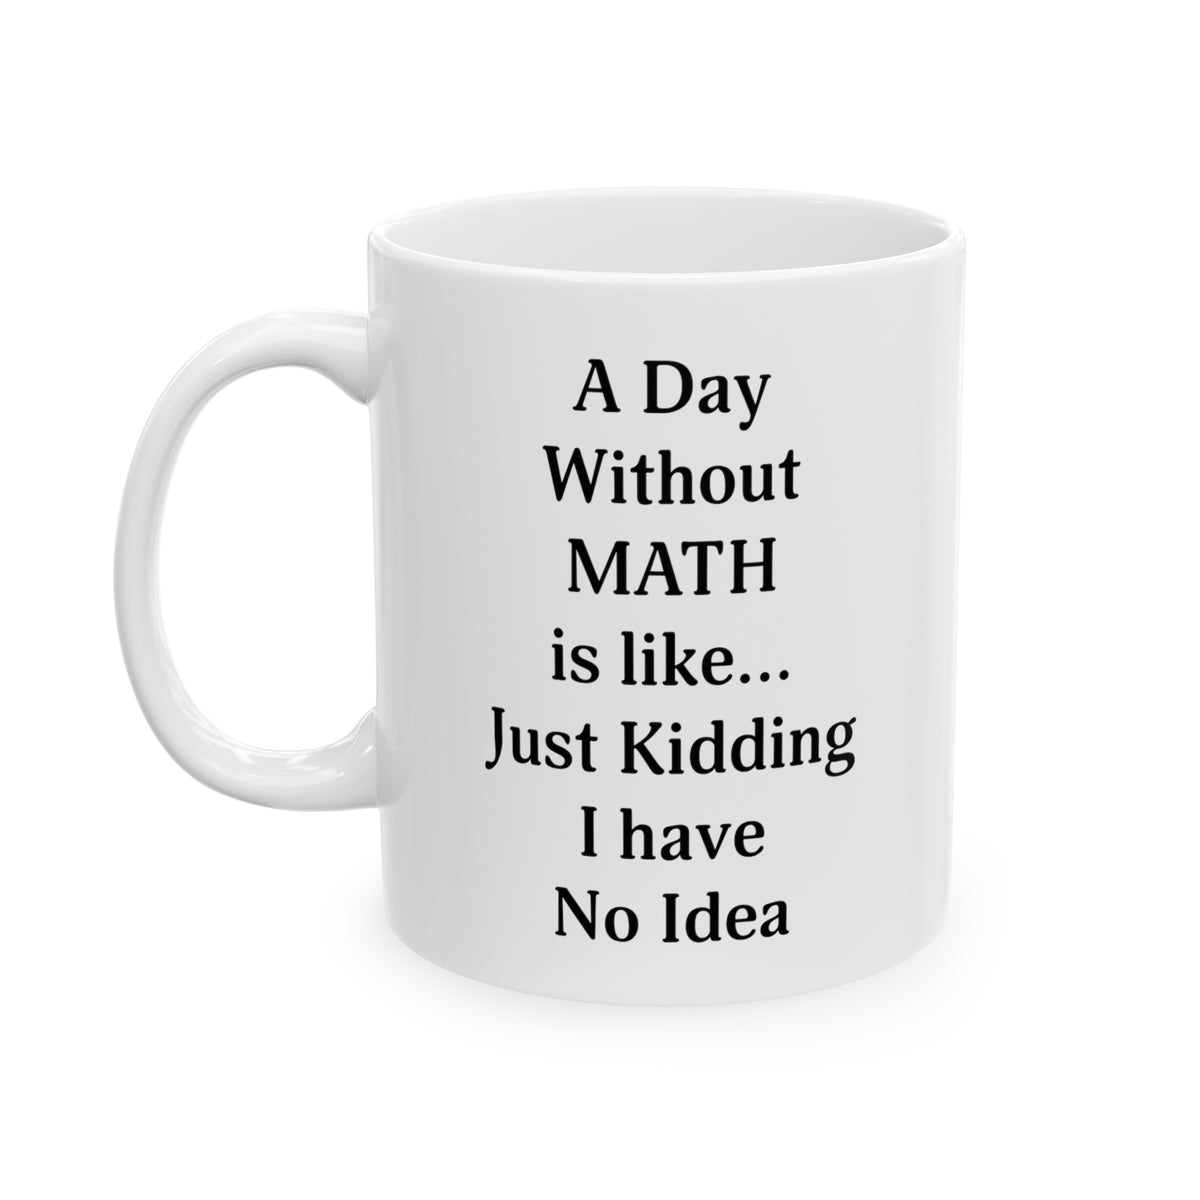 Funny Equation Coffee Mug - A Day Without MATH is like Cup - Fun Gifts for Math Teacher